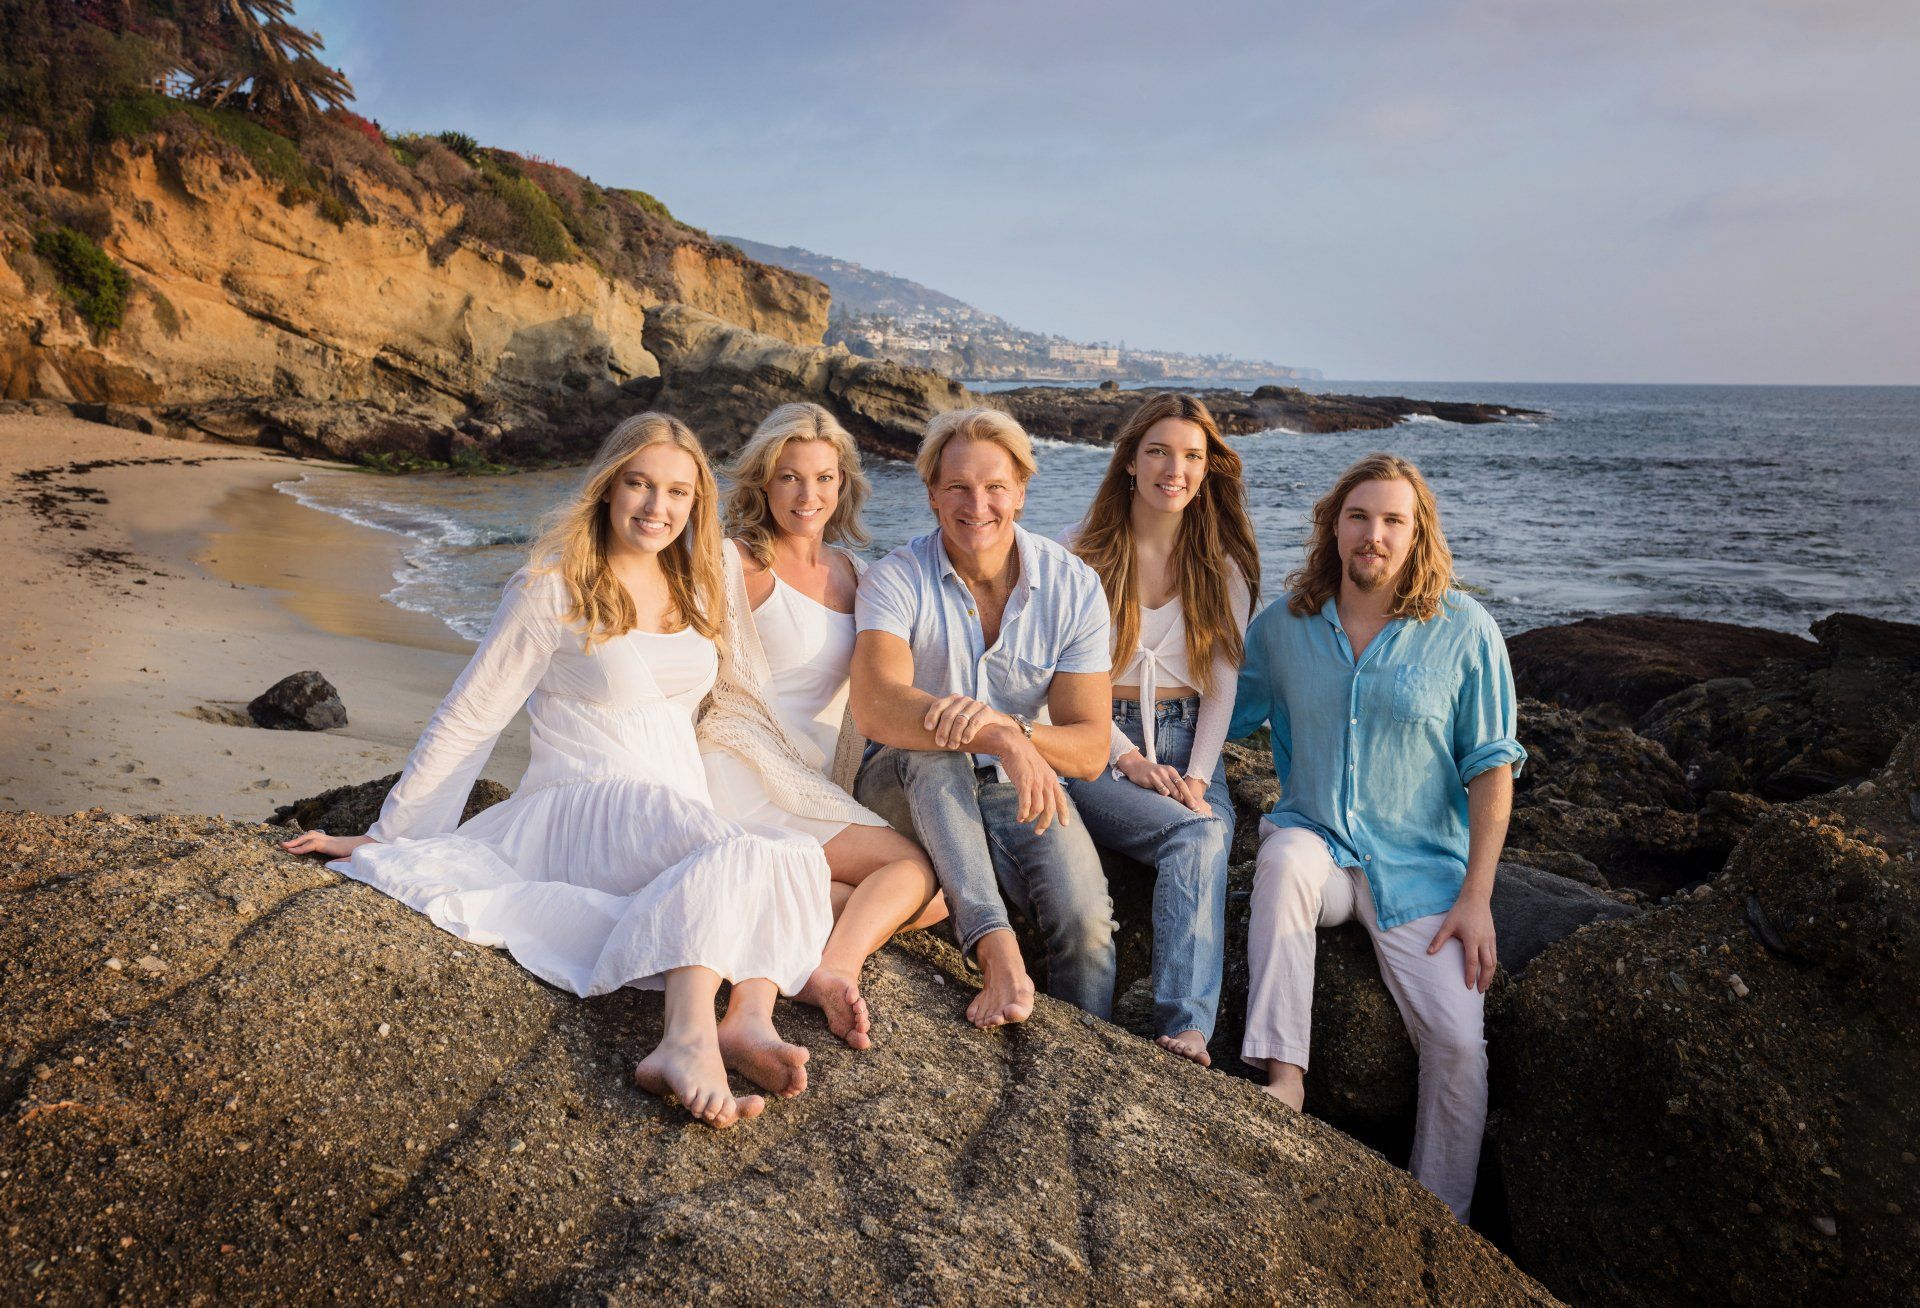 Family Photography session on the beach at the Montage Resort in Laguna Beach.